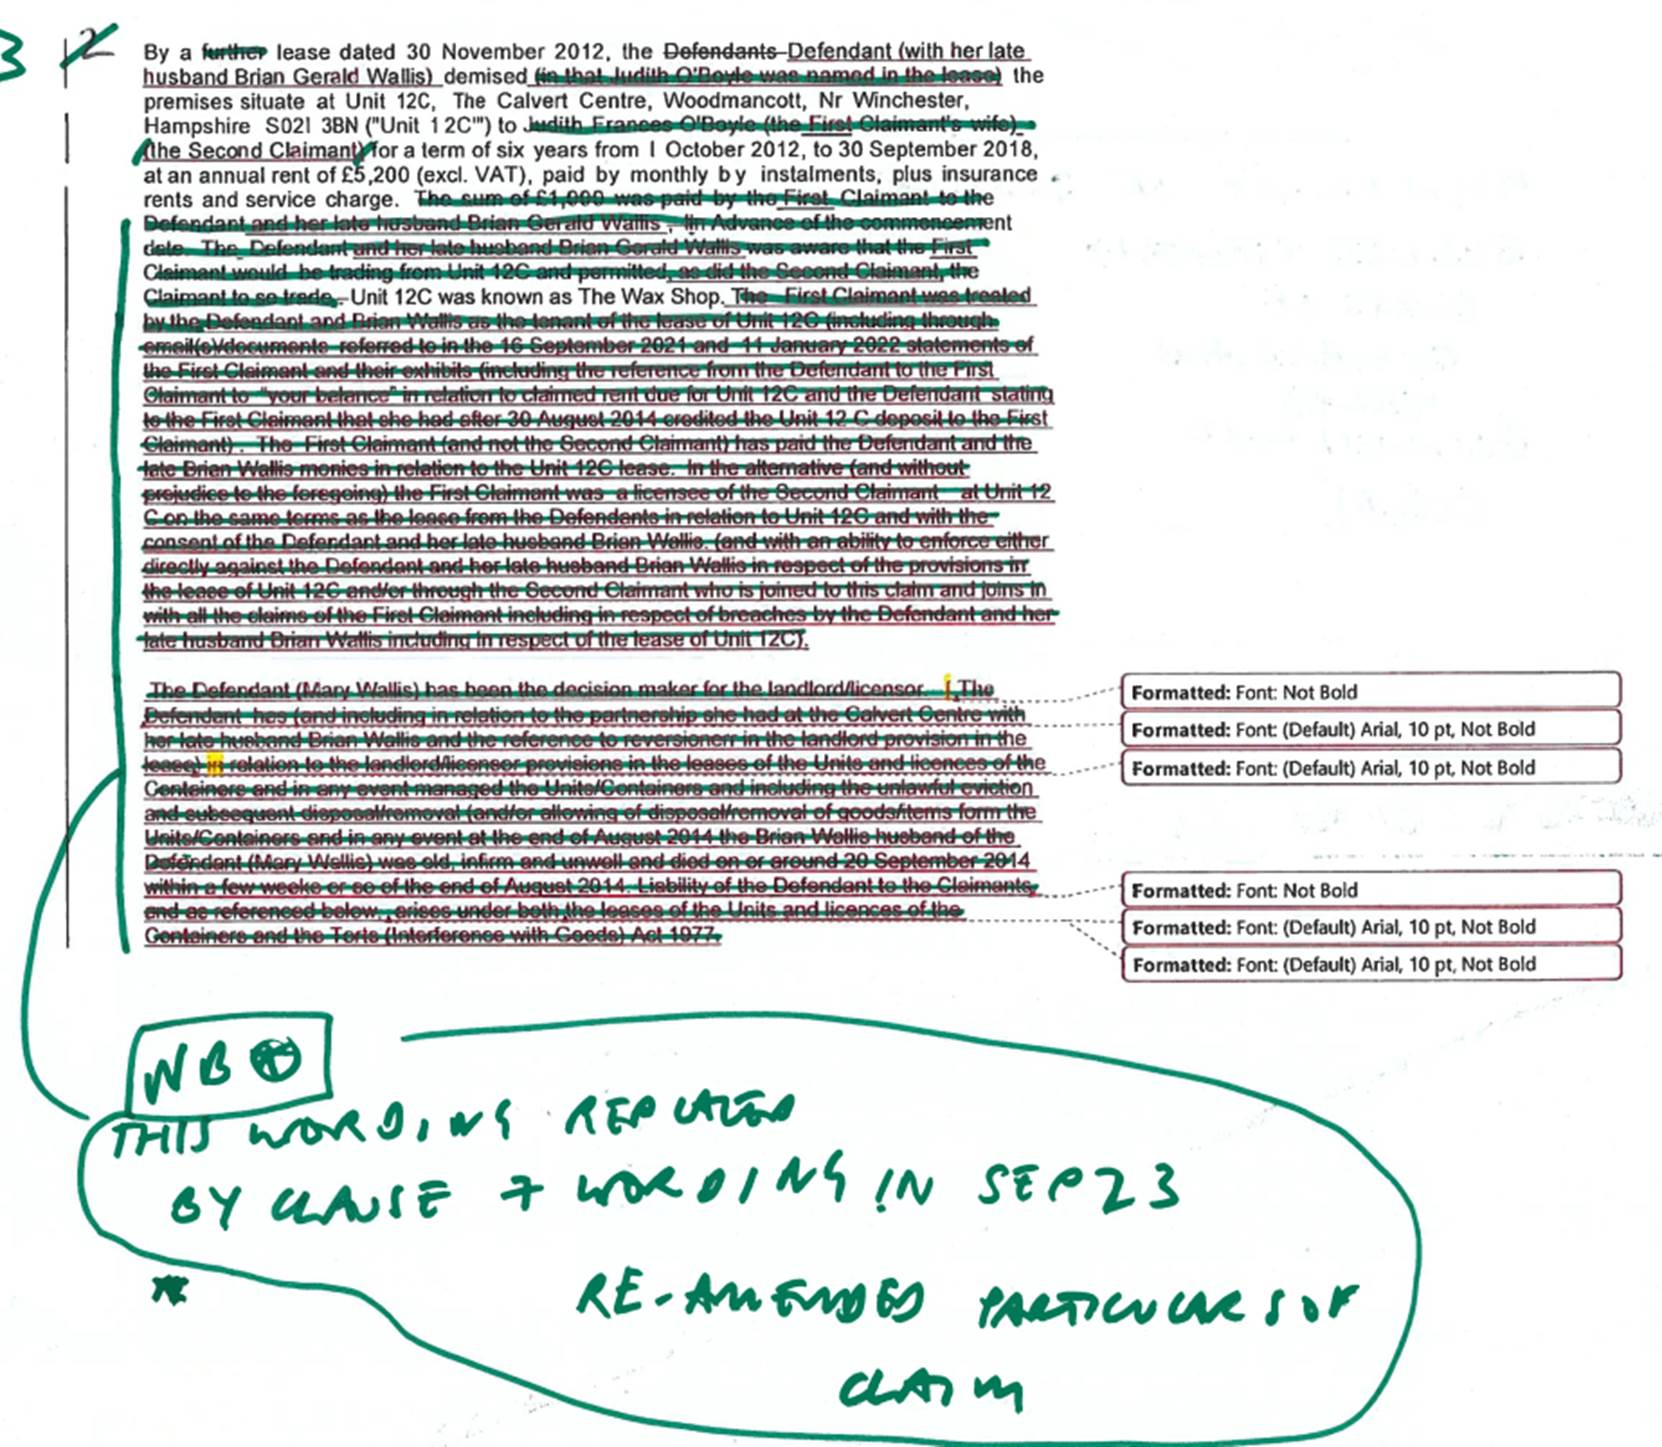 A paper with text and a green marker

Description automatically generated